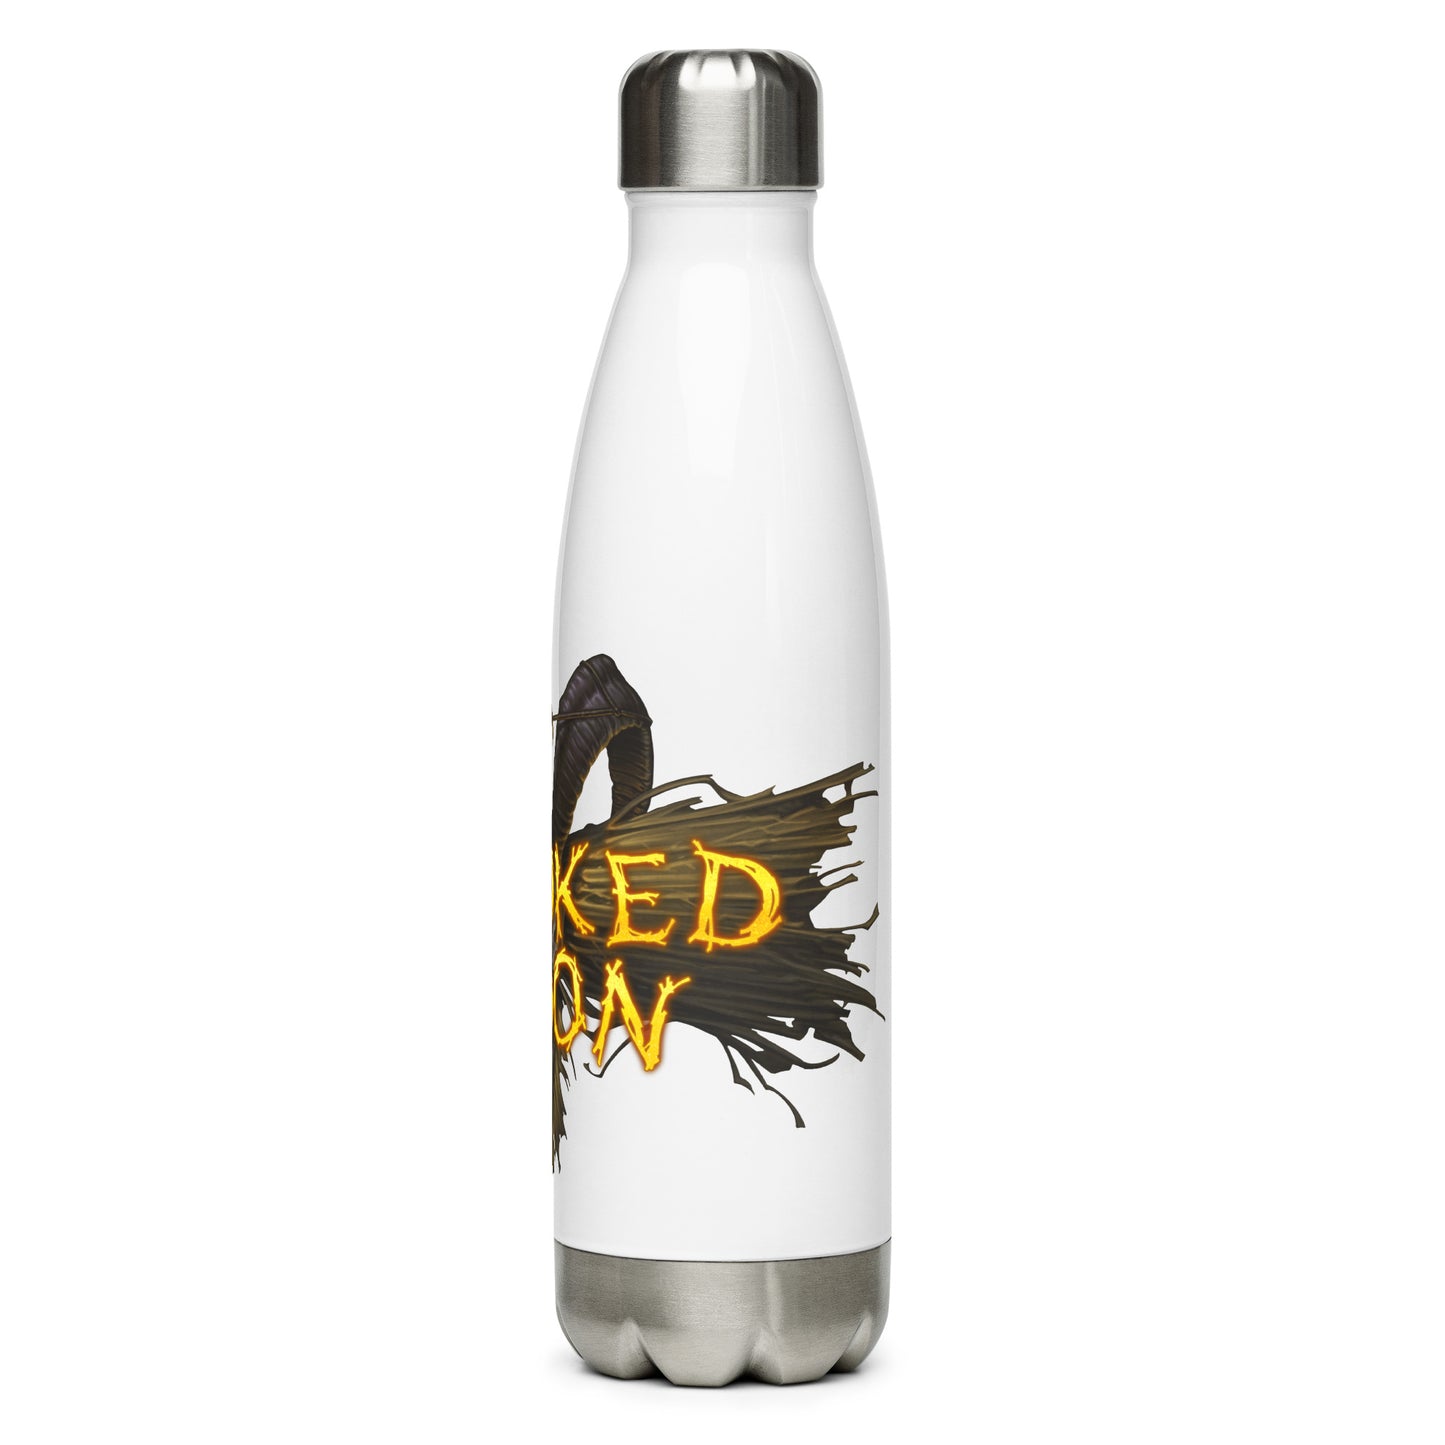 The Crooked Moon - Stainless Steel Water Bottle